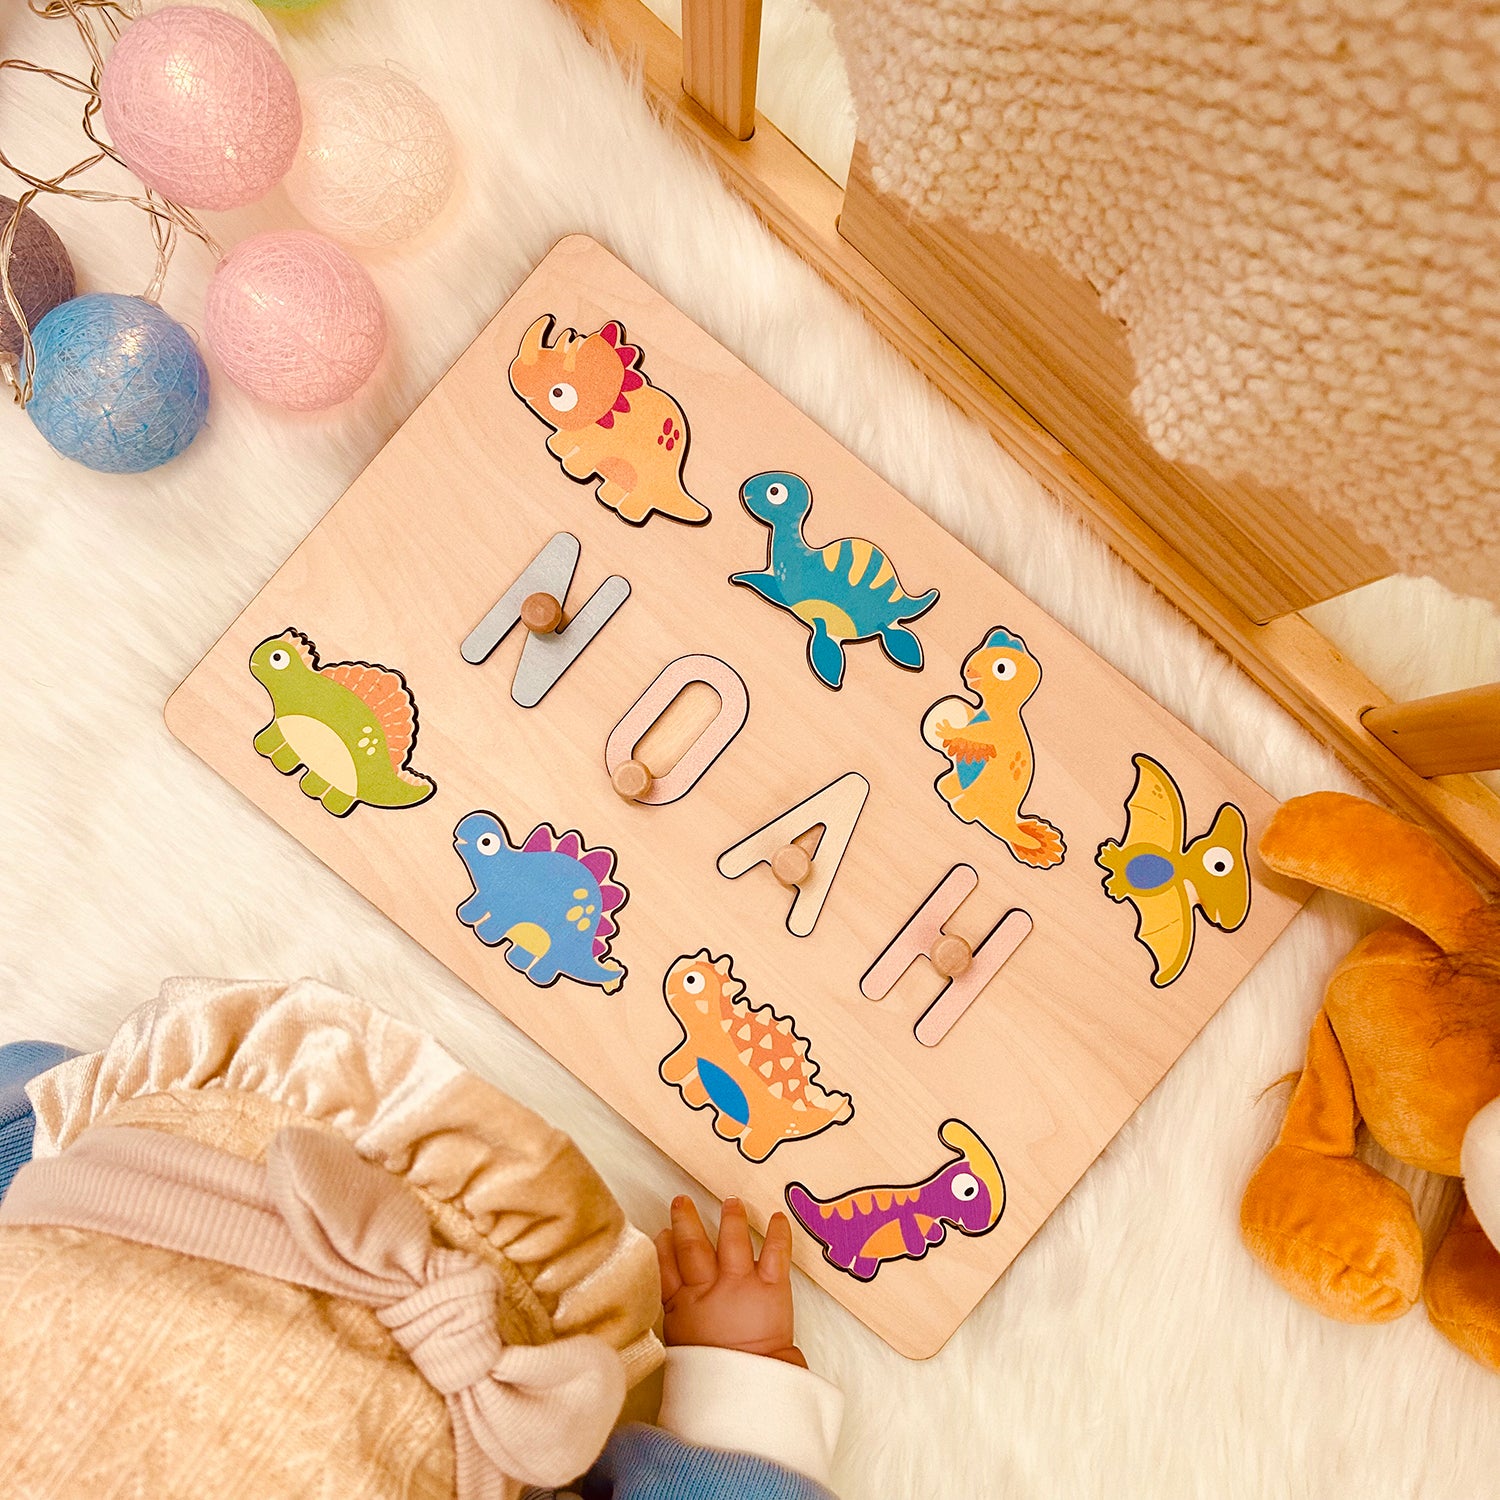 Personalized Wooden Baby Name Puzzle - Dinosaurs